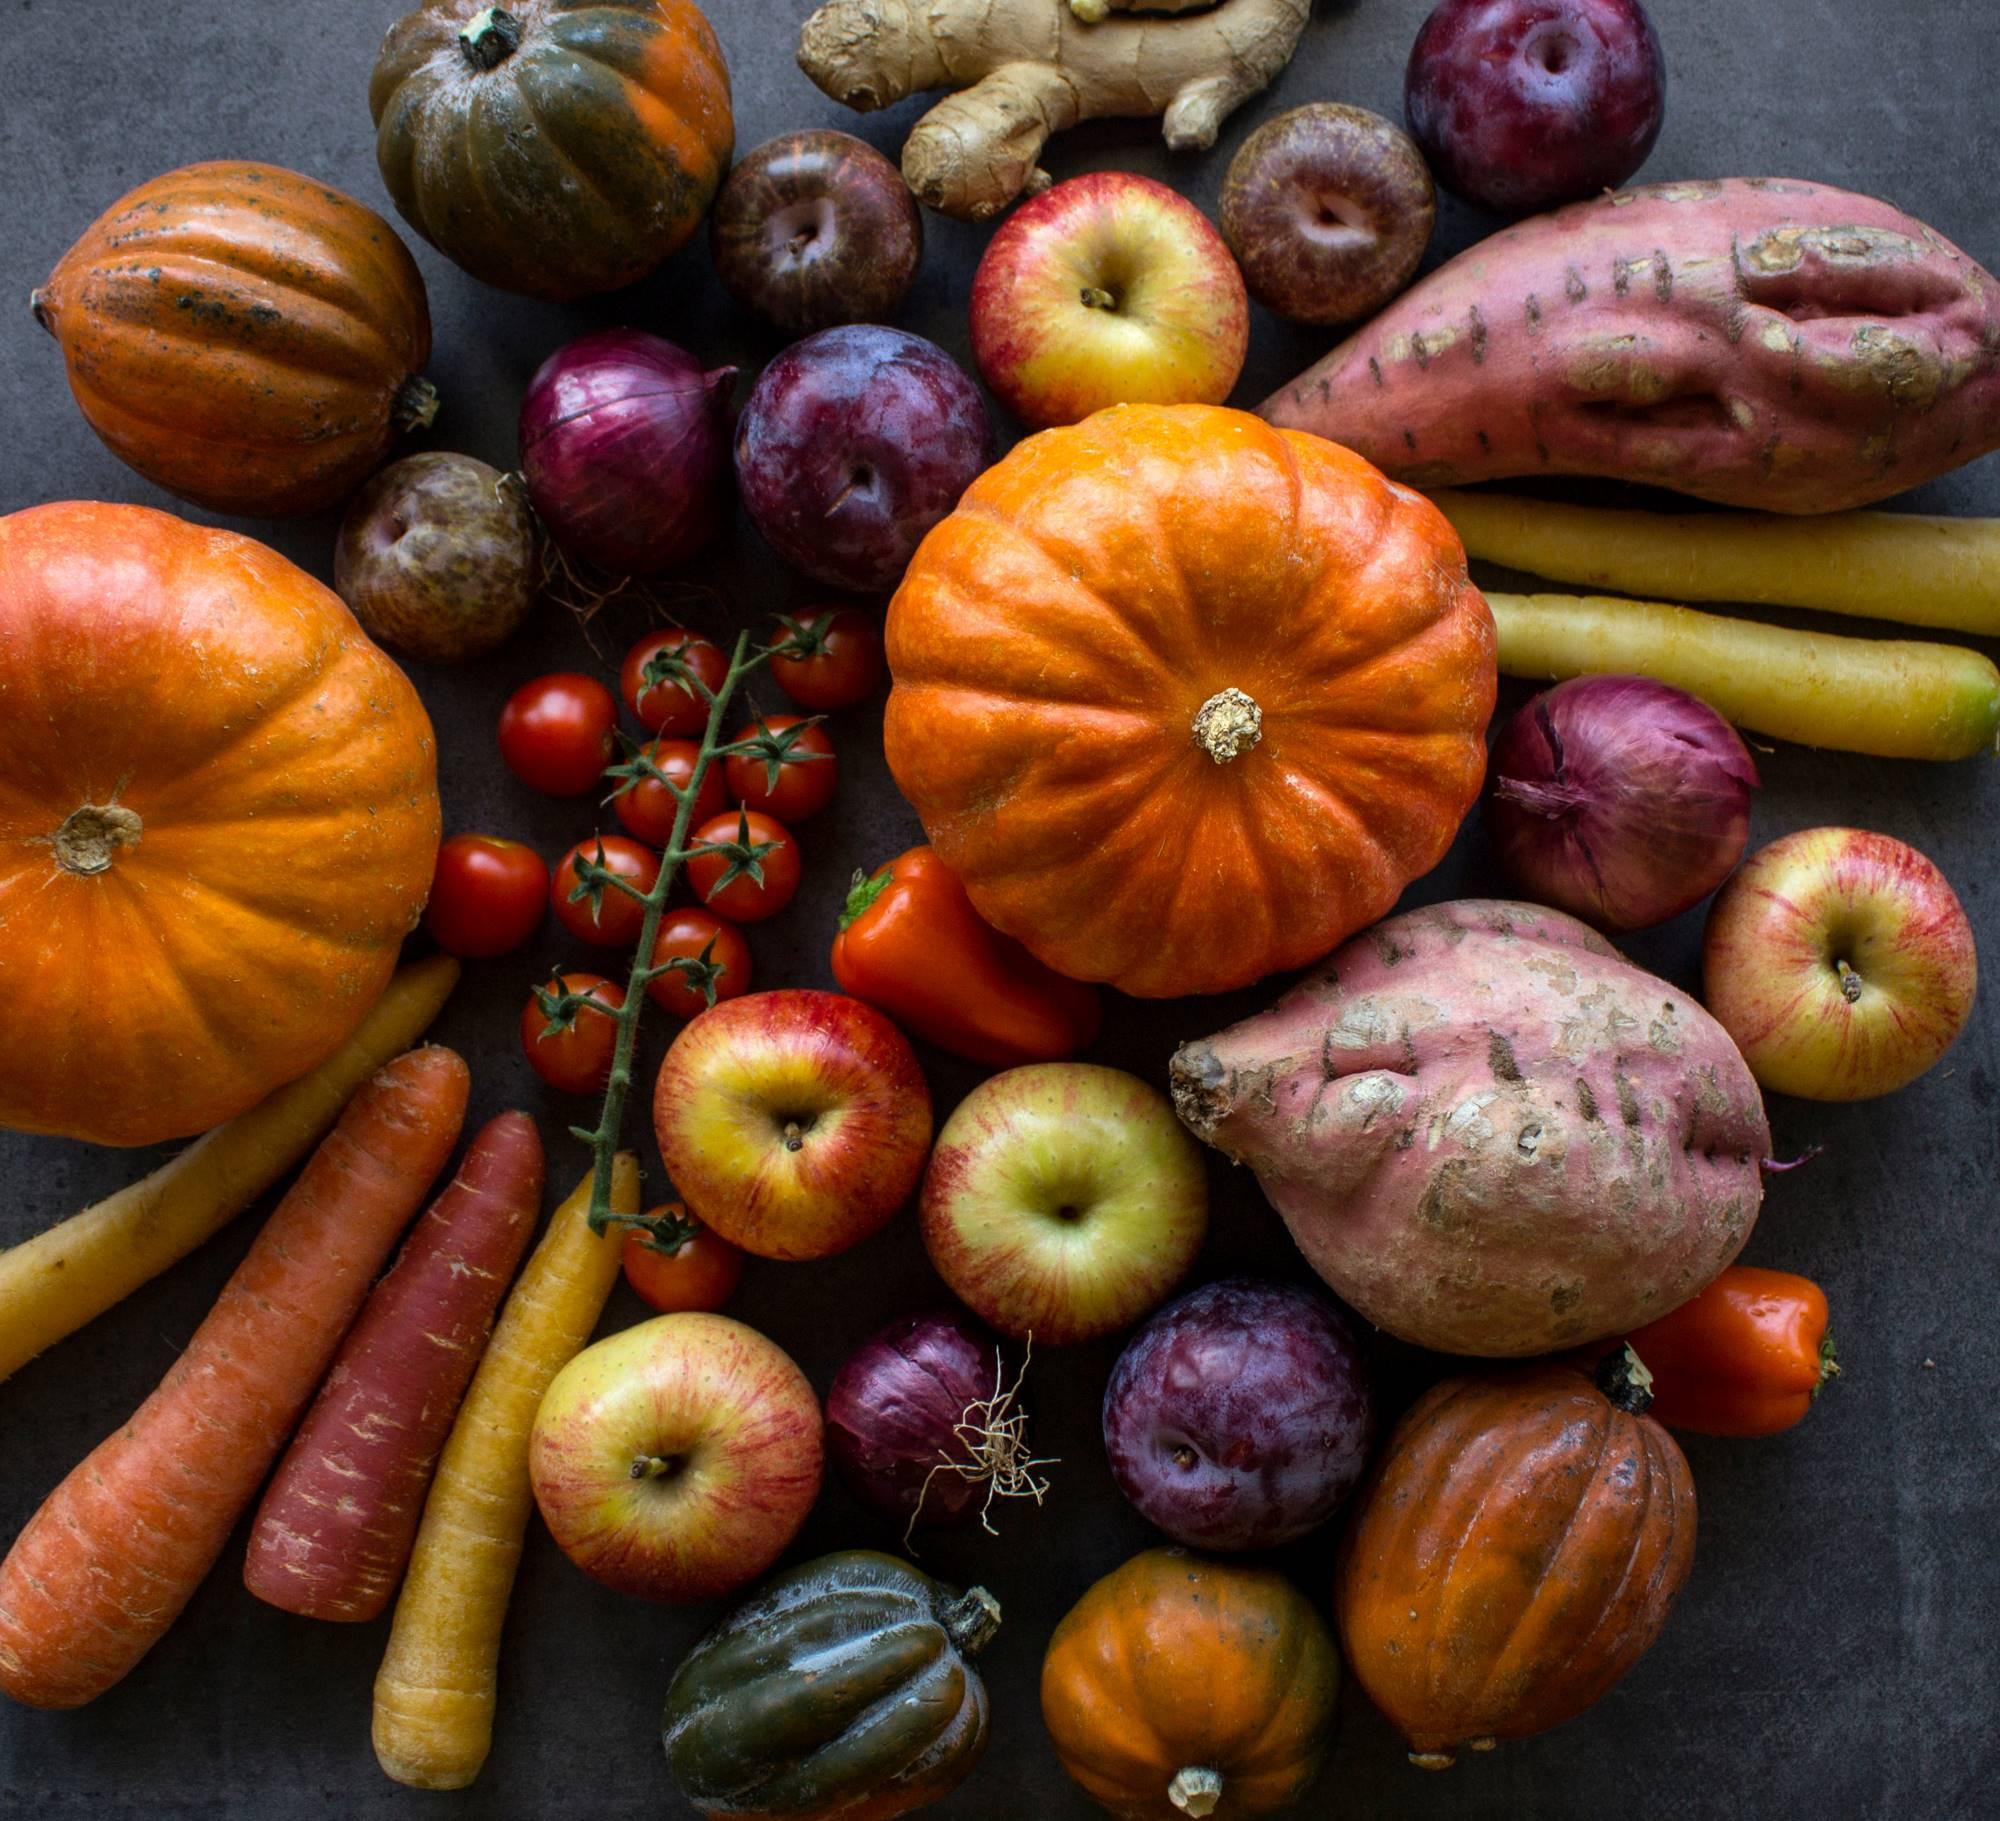 A collage of fall fruits and vegetables including carrots, pumpkins, tomatoes, apples, squash, and sweet potatoes.